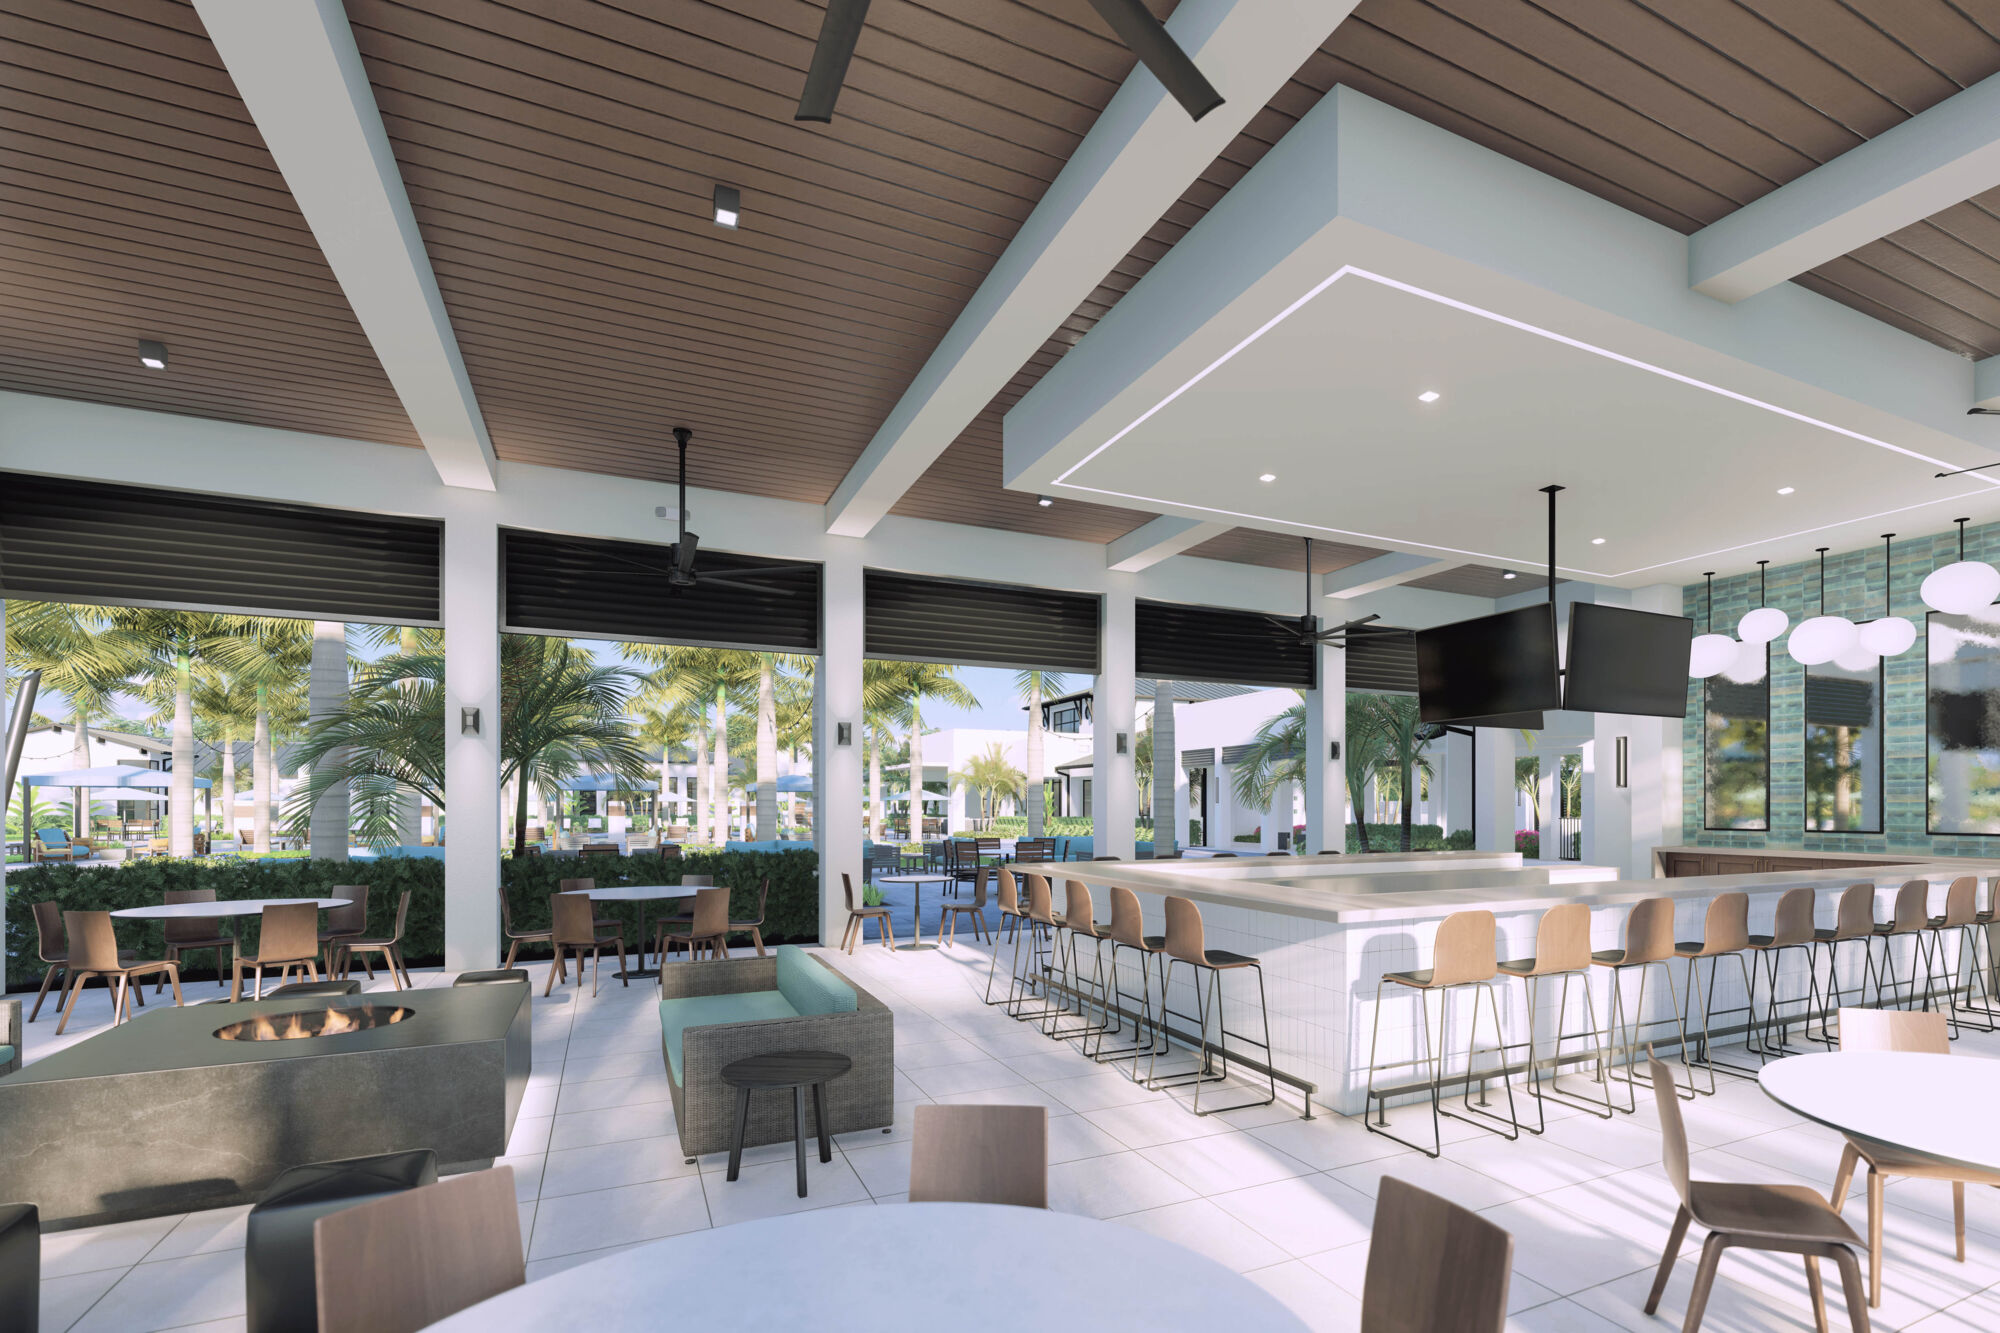 Rendering of outdoor covered cafe area